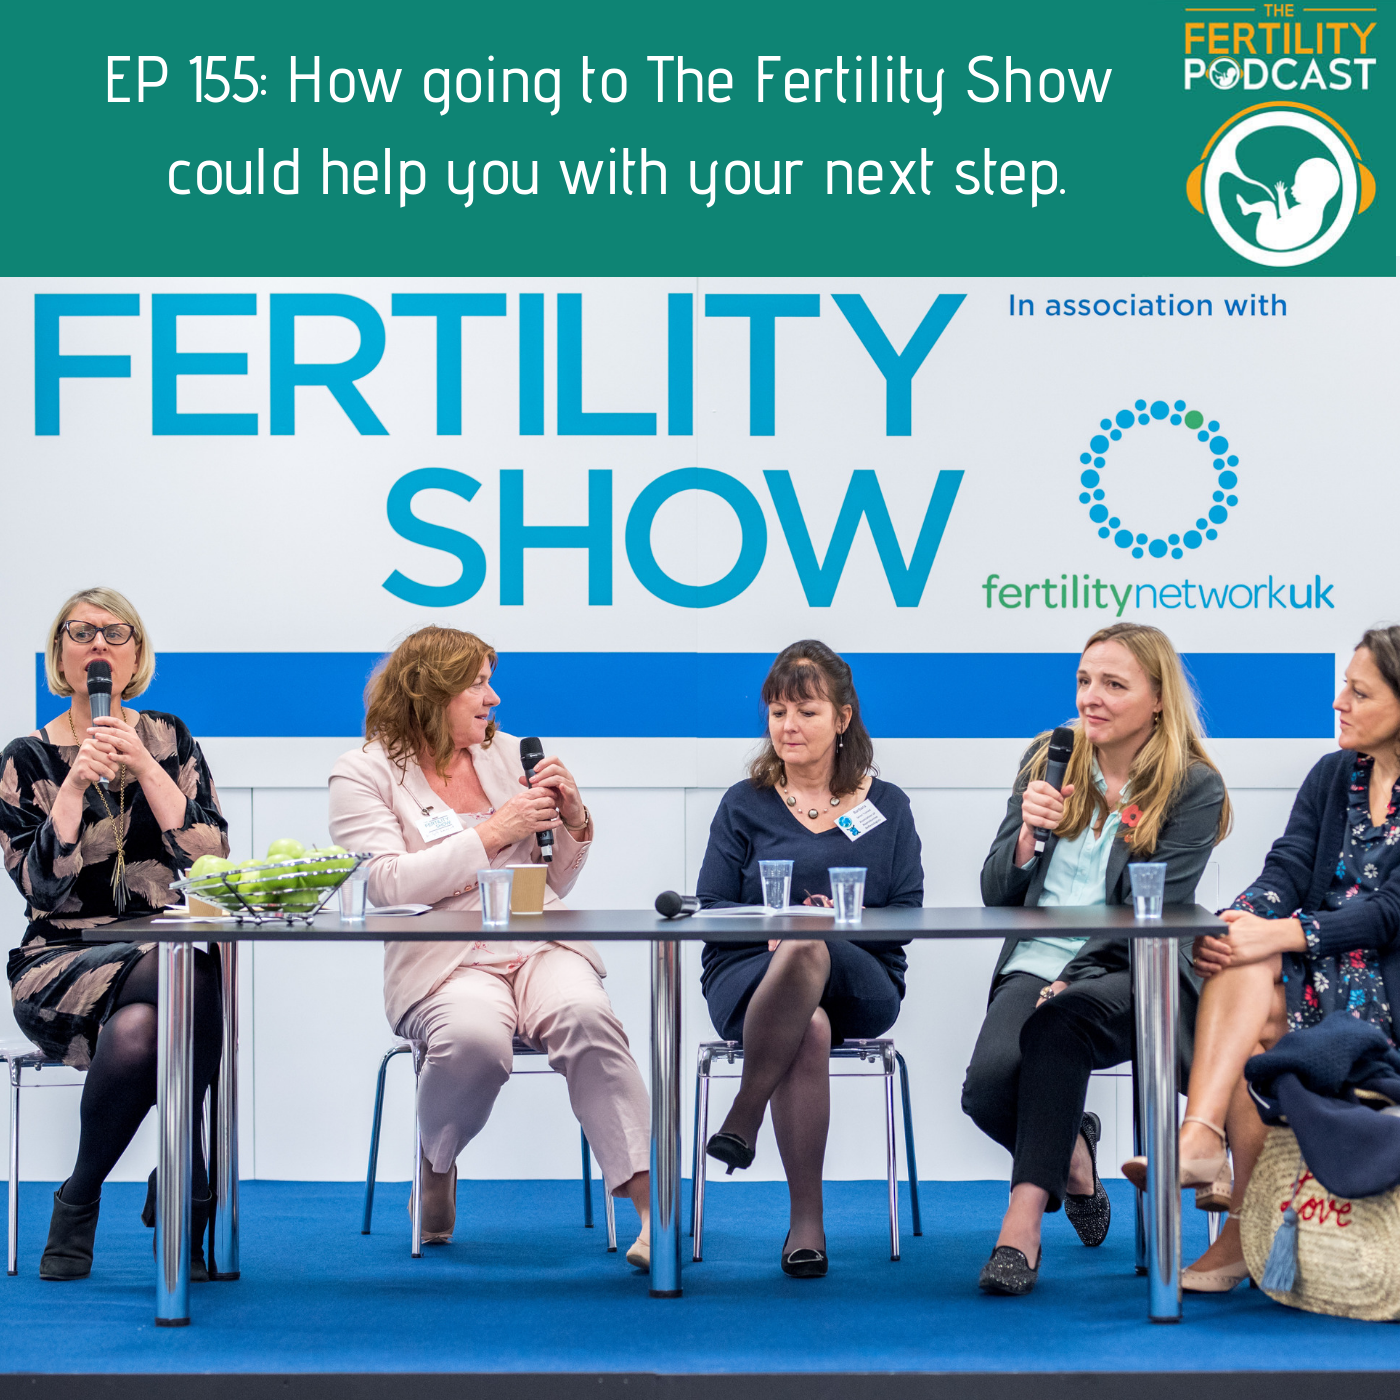 Is The Fertility Show right for me?